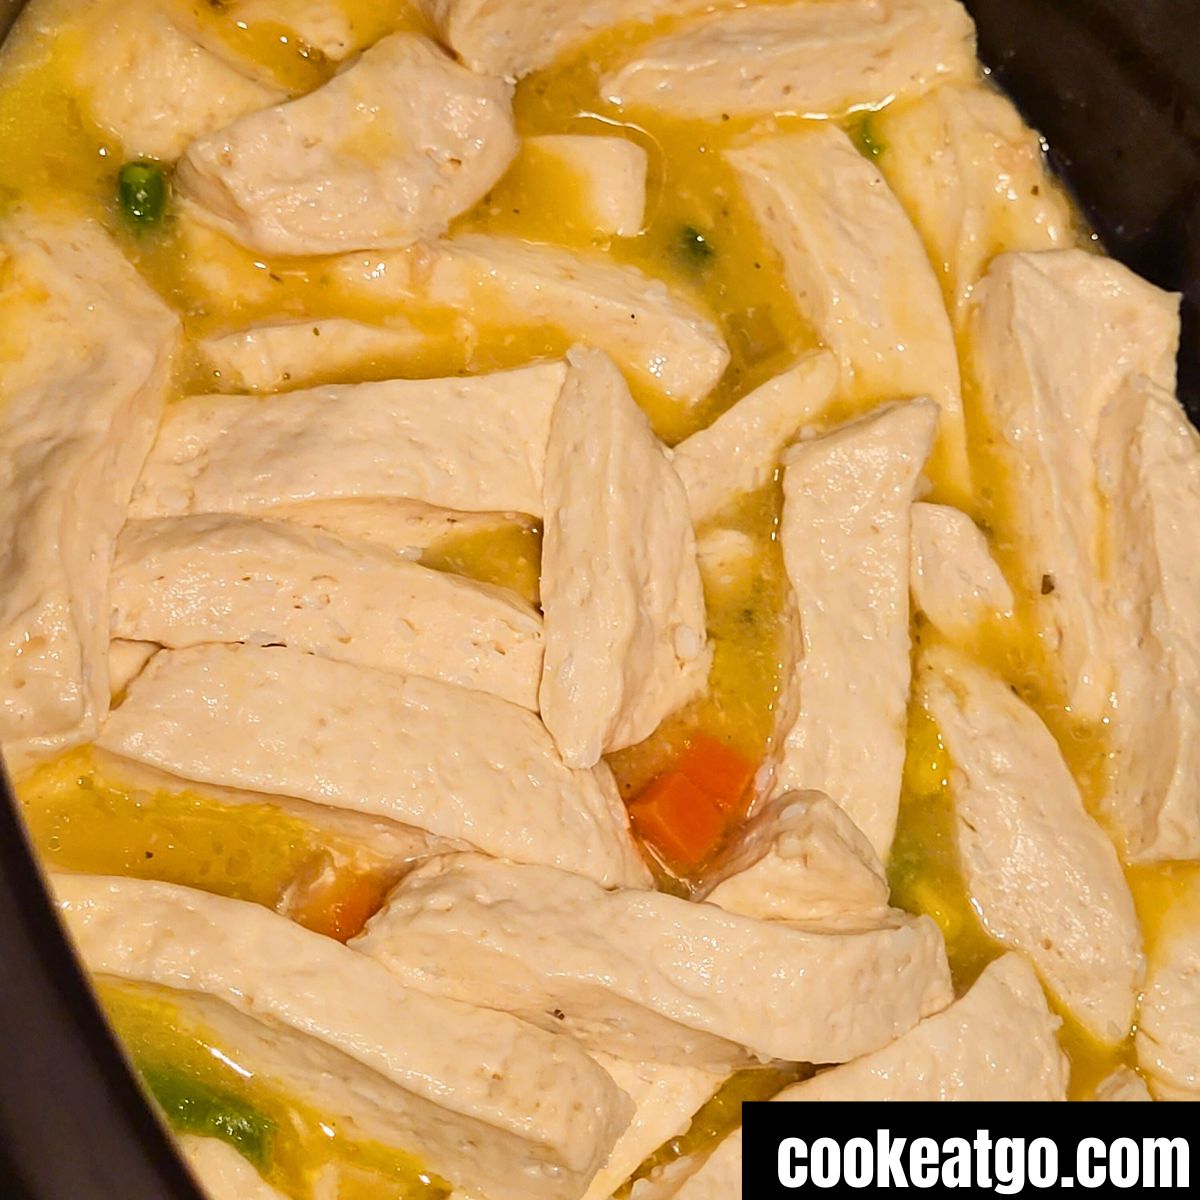 Sliced refrigerator biscuit in crockpot of chicken and dumpling before biscuits cooking